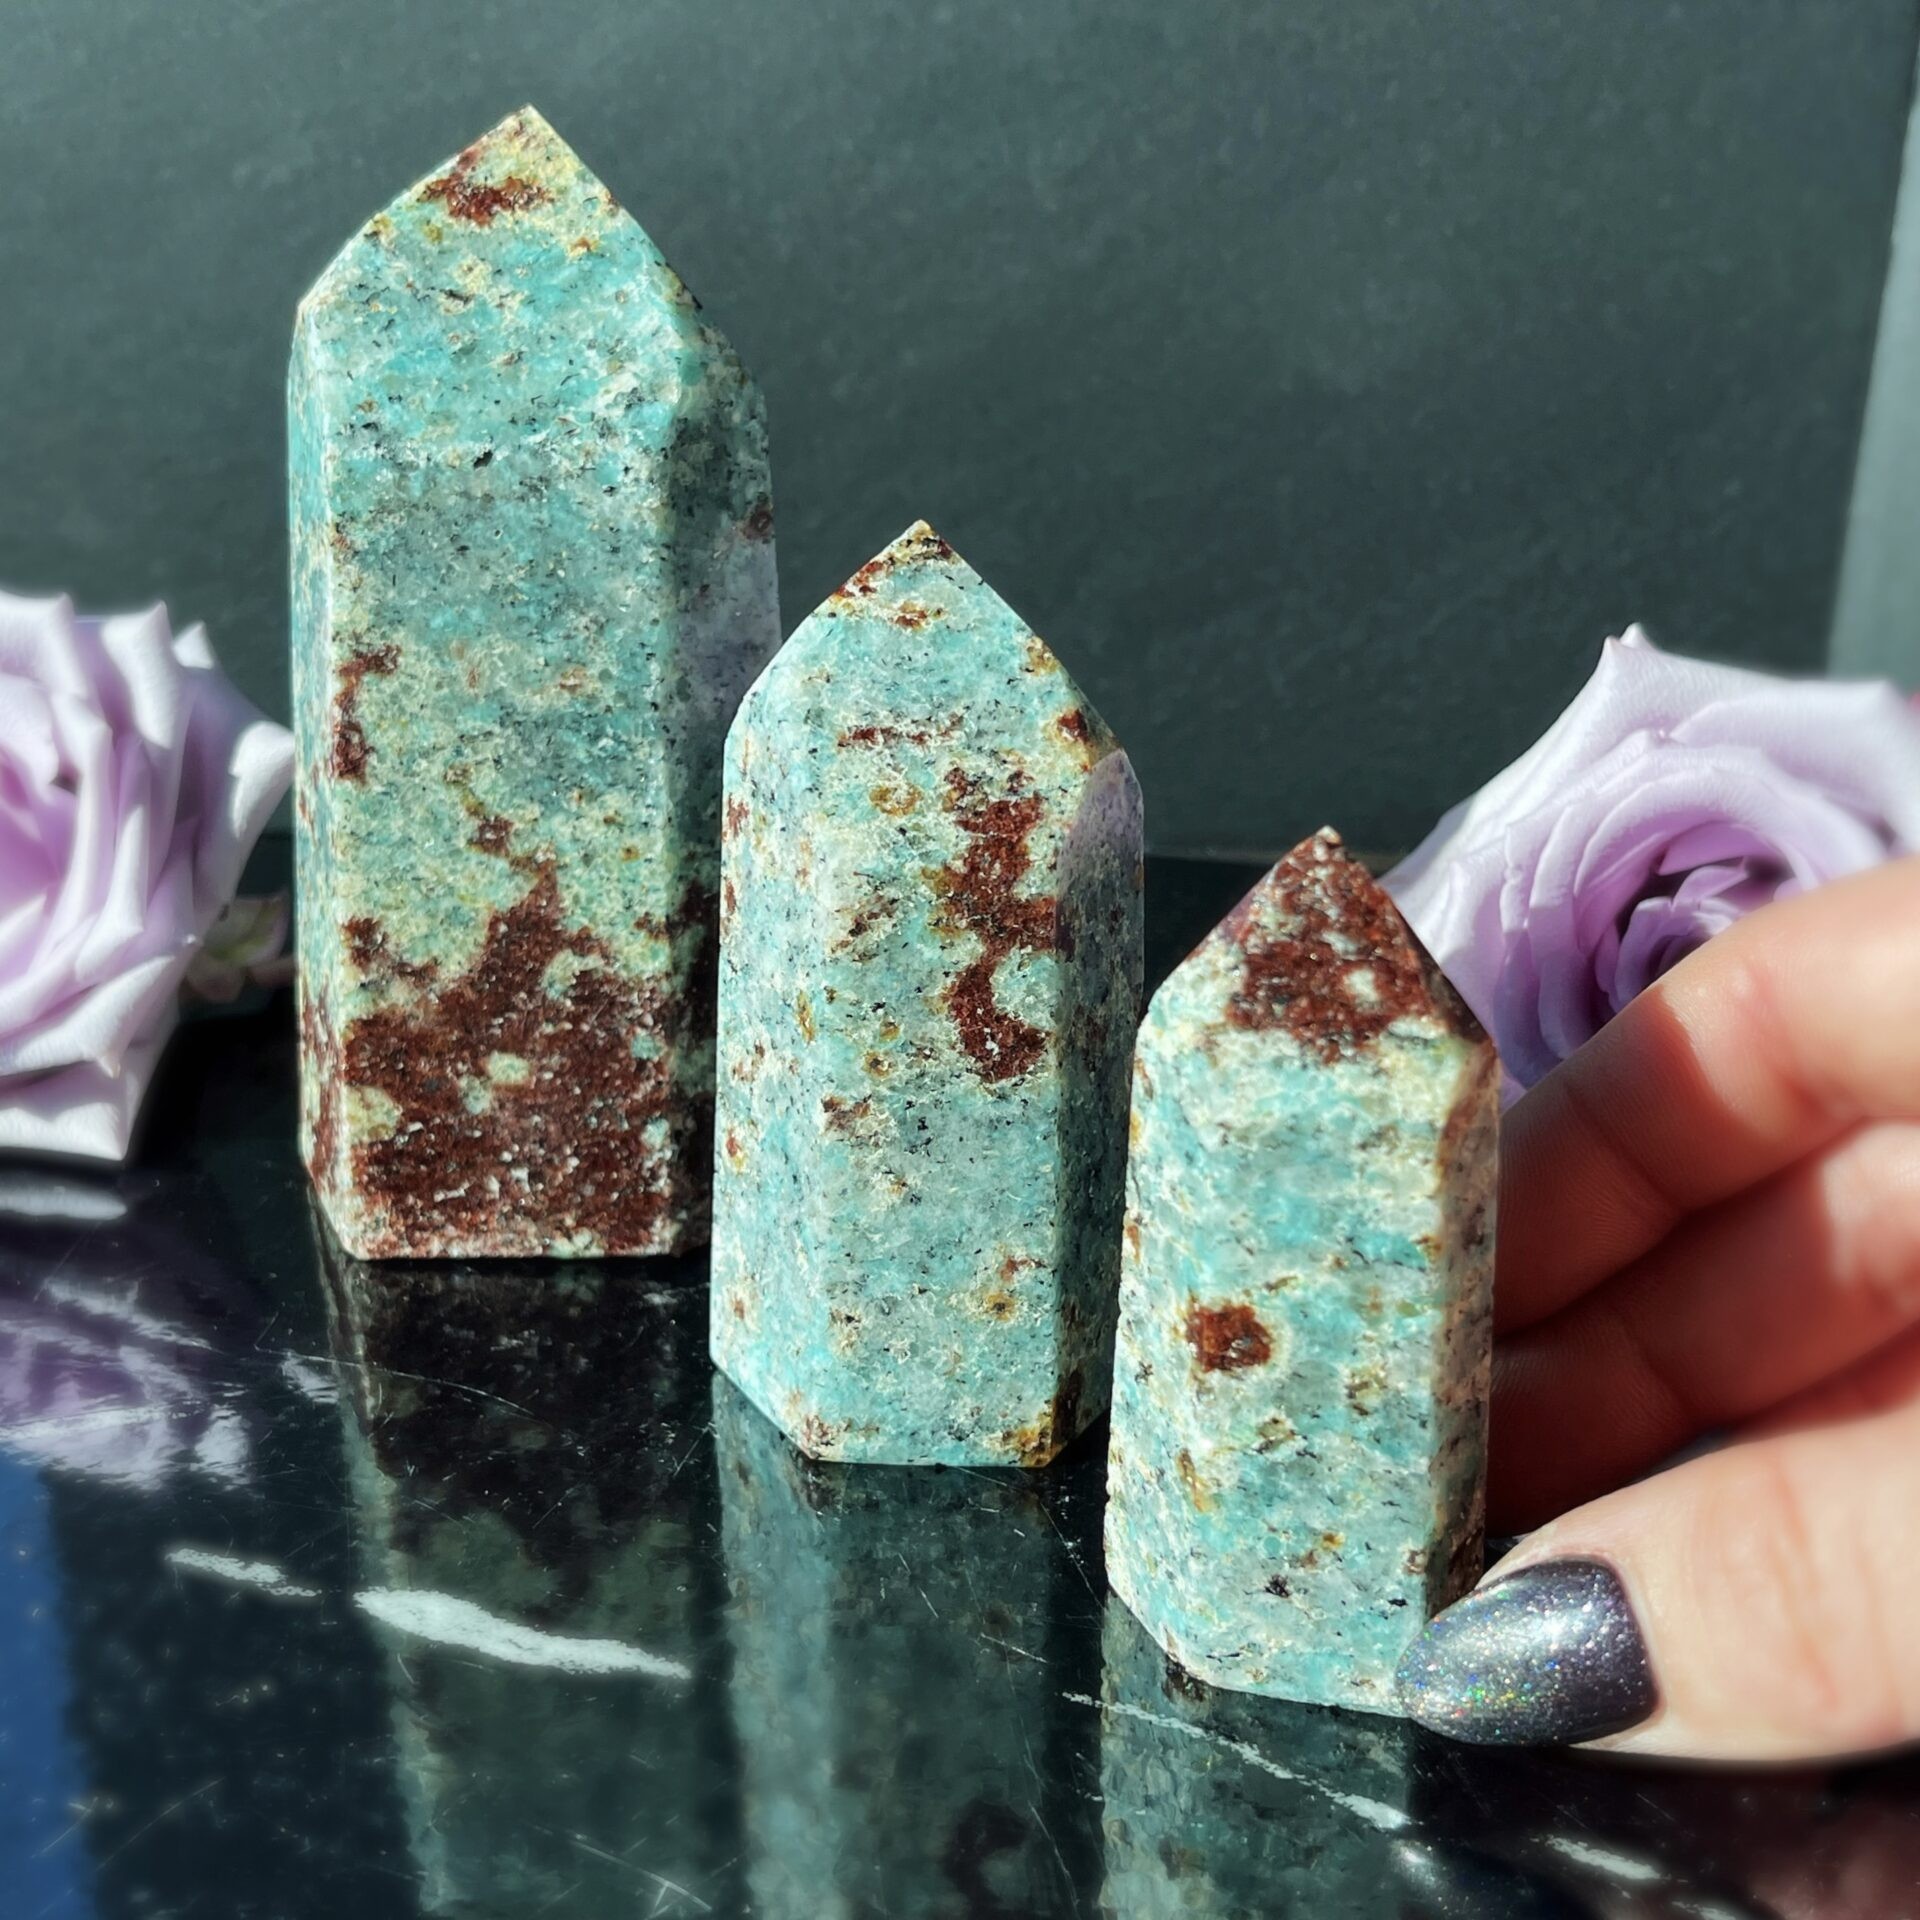 Grounded Truth Amazonite, Garnet, and Black Tourmaline in Mica Generator